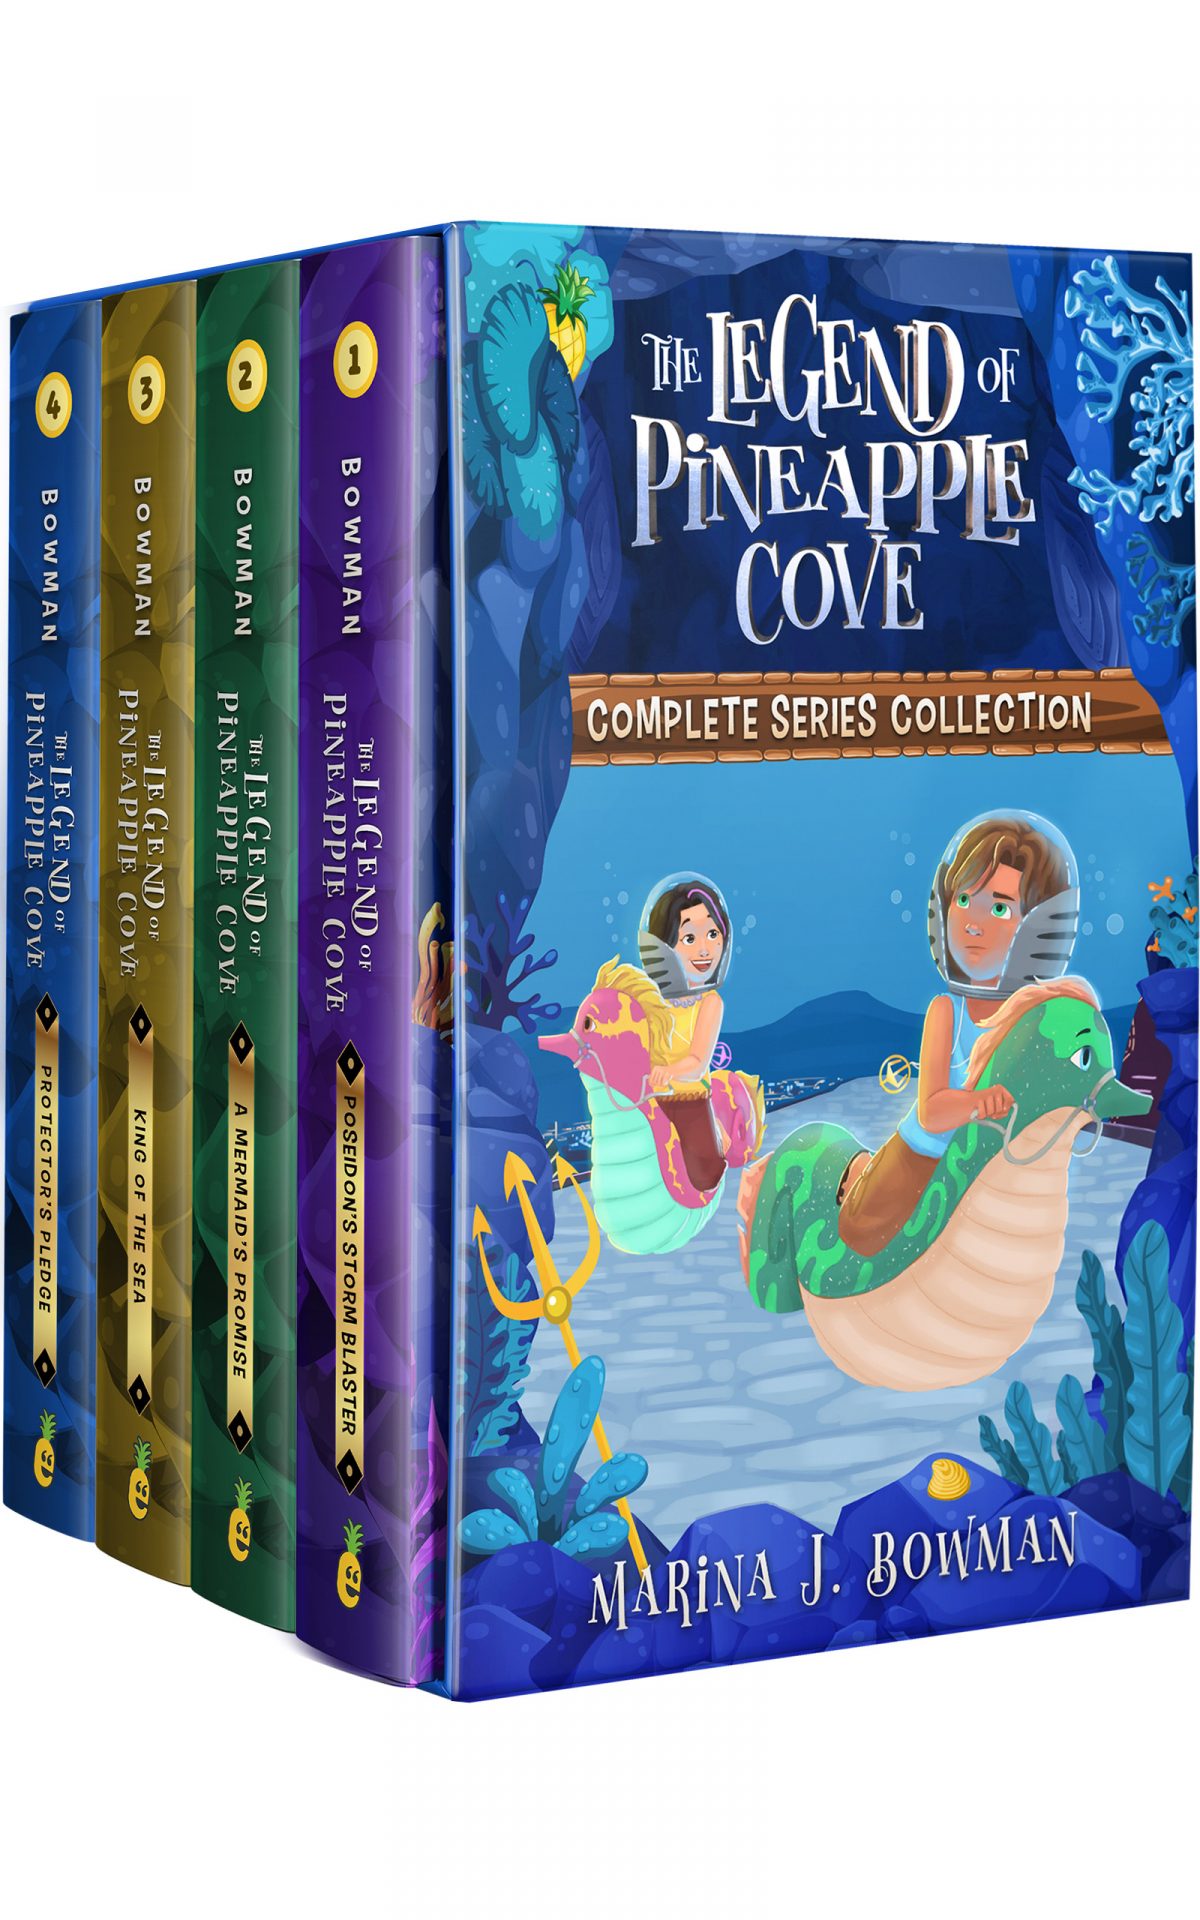 Free: The Legend of Pineapple Cove: Complete Series Collection